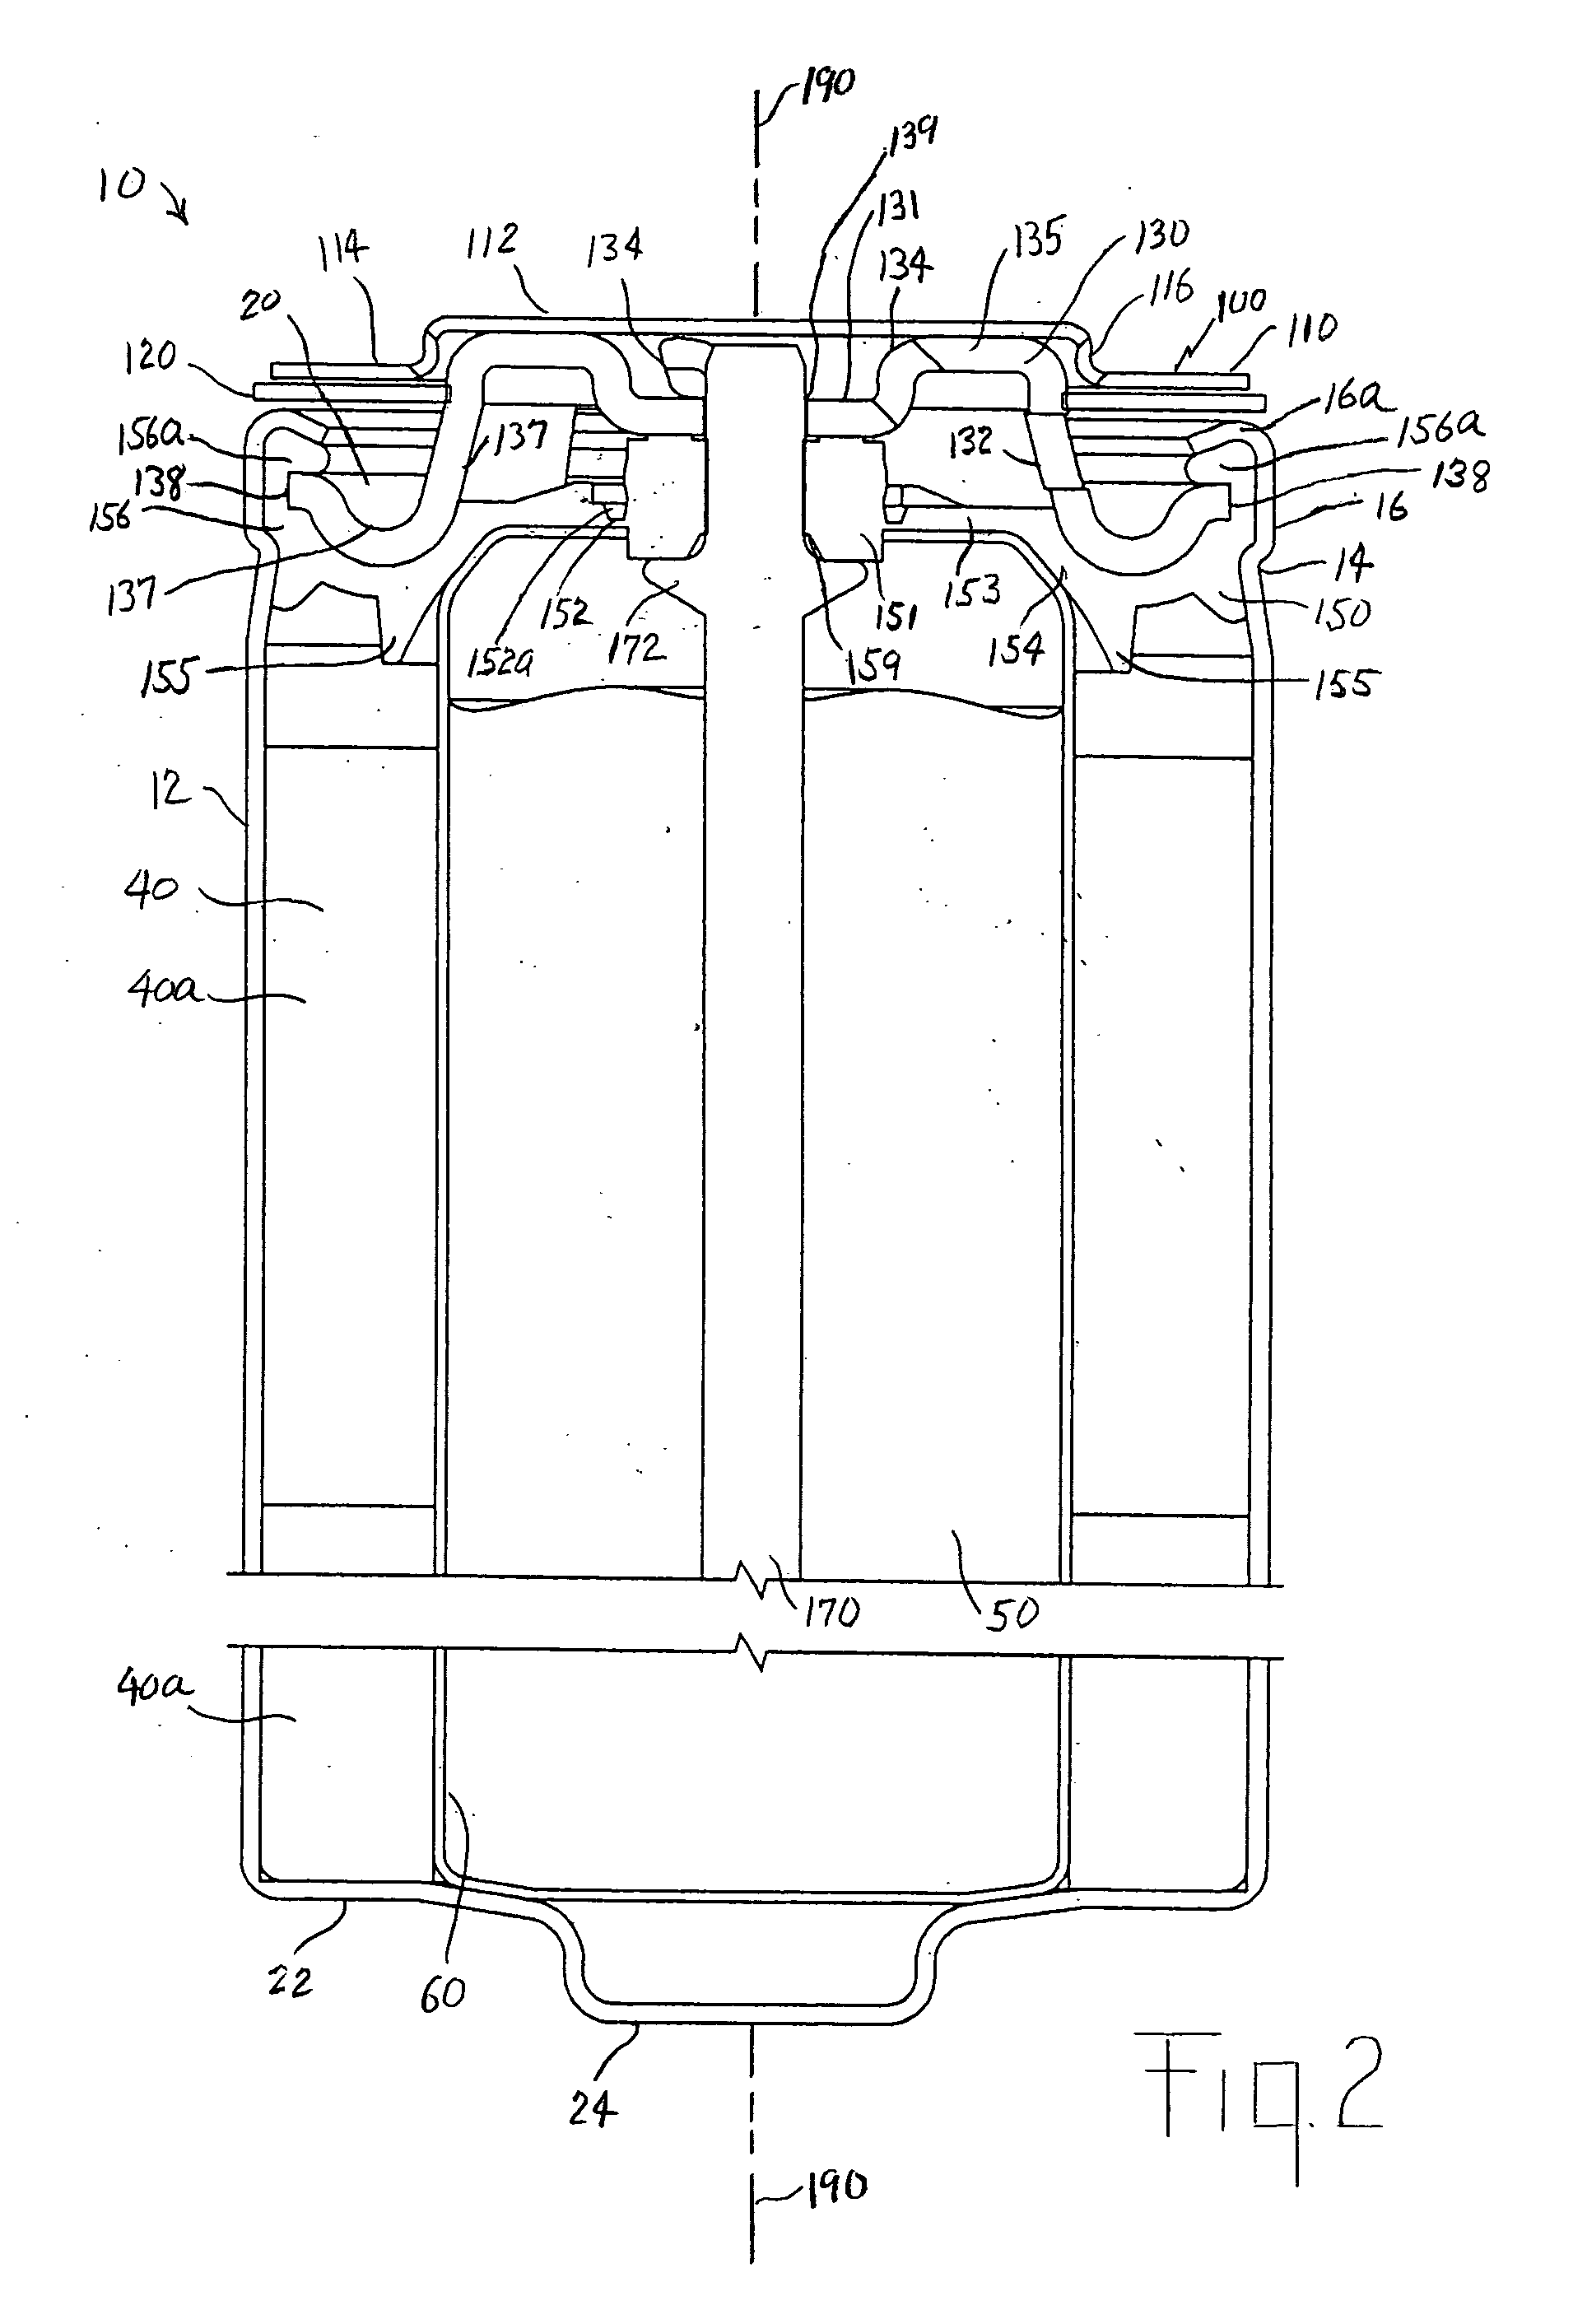 End cap assembly and vent for high power cells